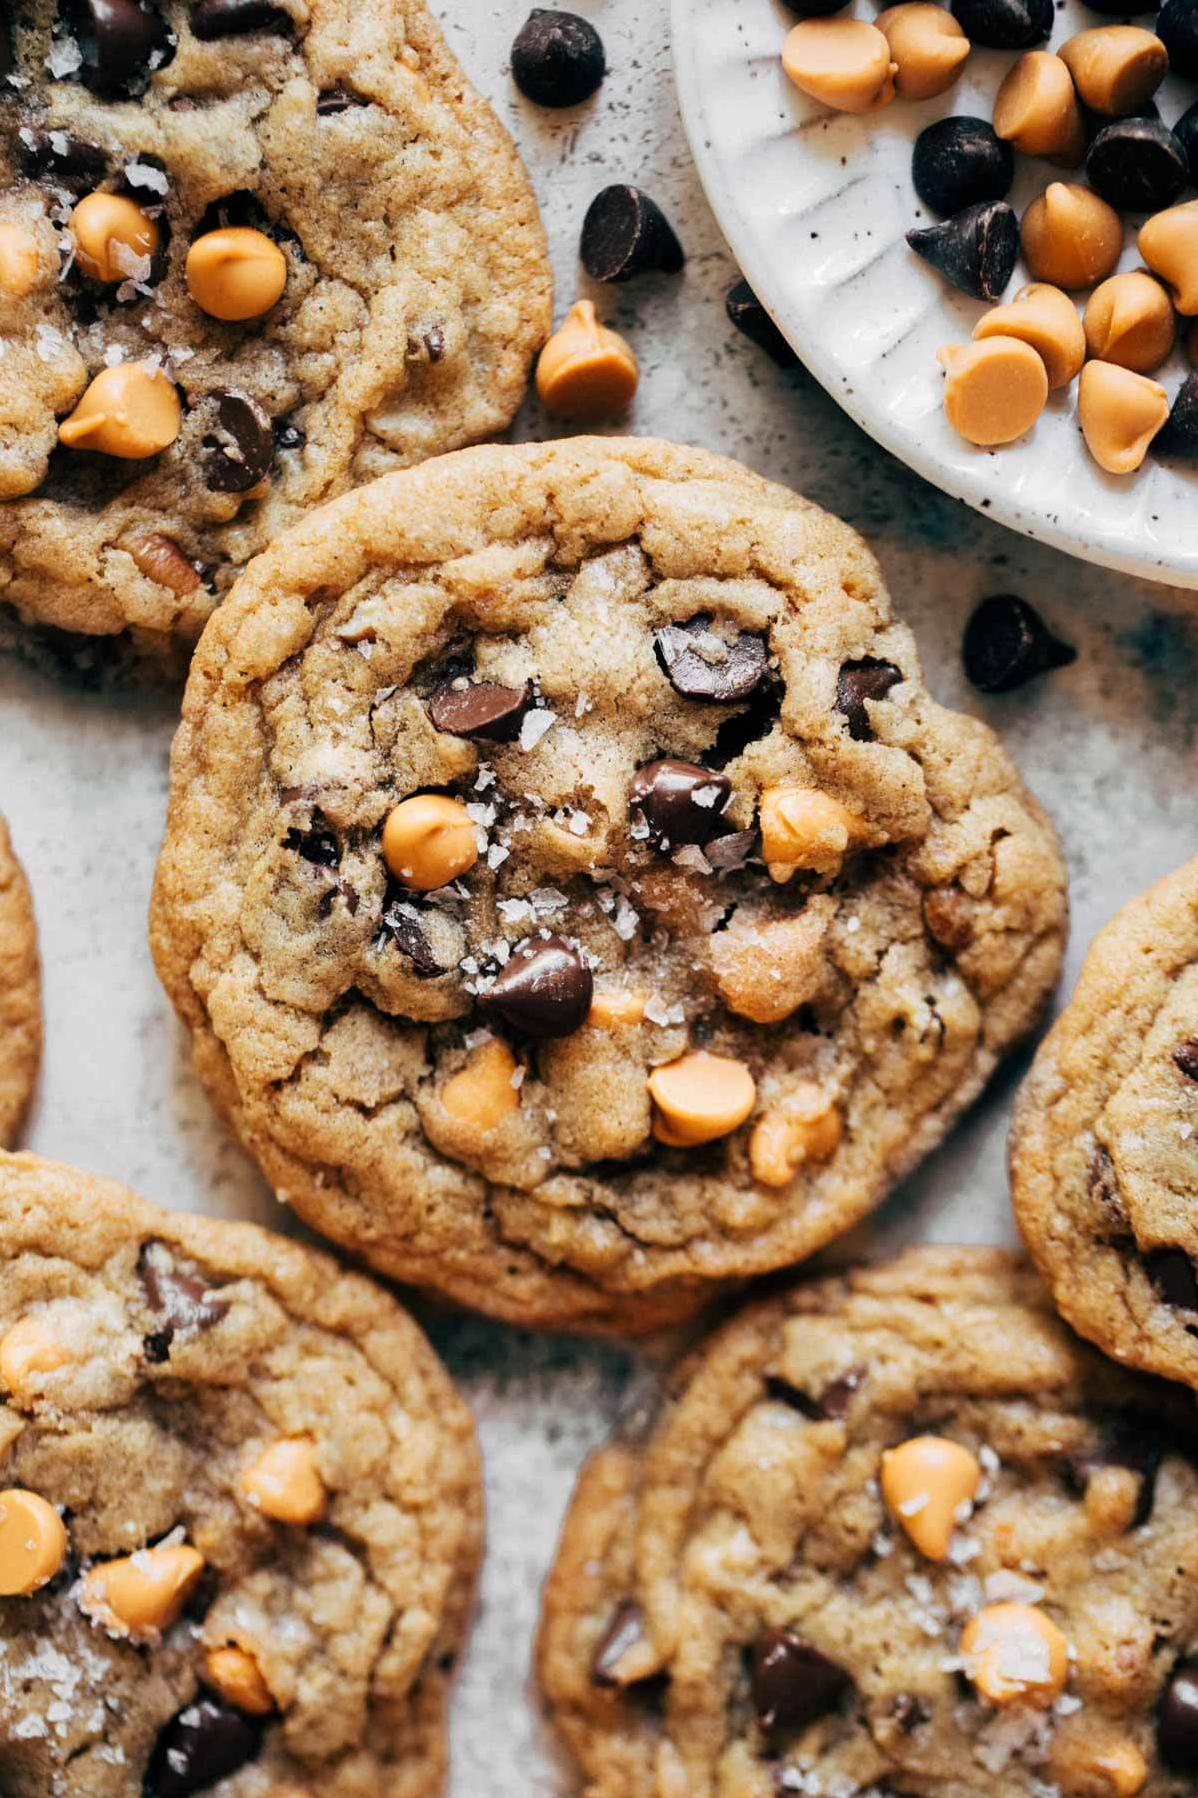  With each bite of these cookies, you'll get a burst of chocolate and a hint of scotch.